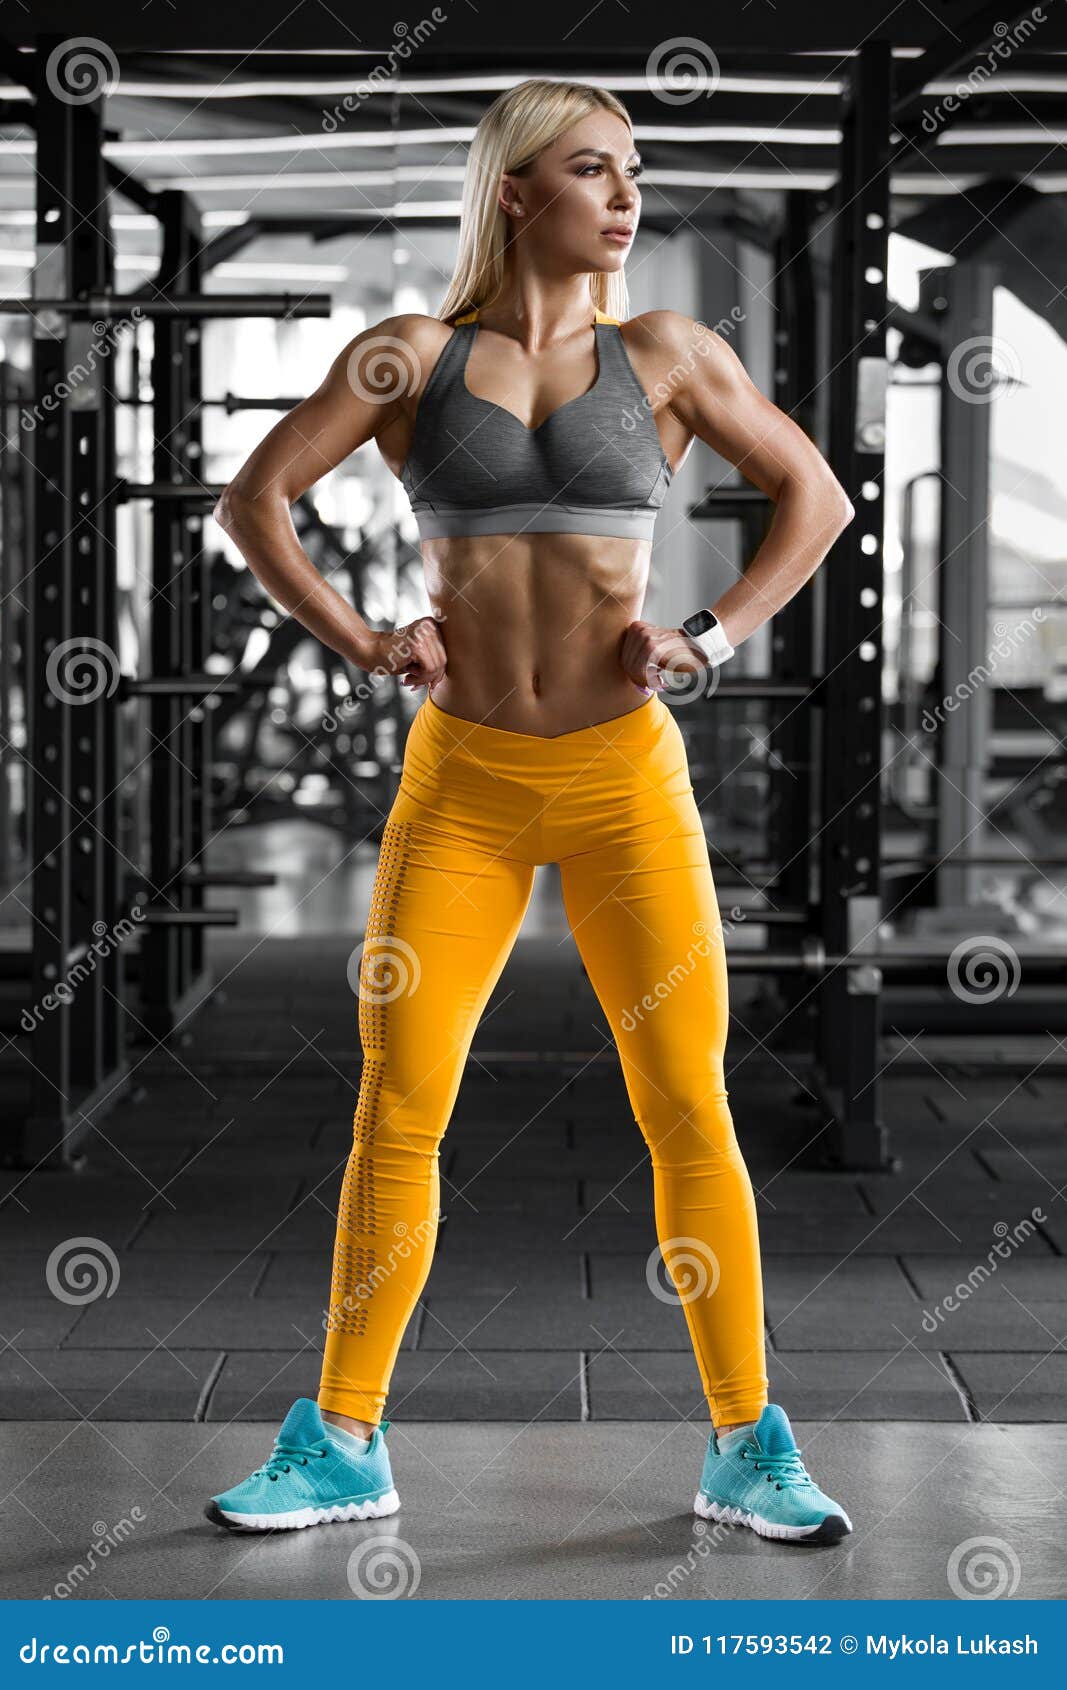 Athletic Girl in Gym, Working Out. Fitness Woman Showing Abs and Flat  Belly, Shaped Body Stock Photo - Image of healthy, muscular: 117593542